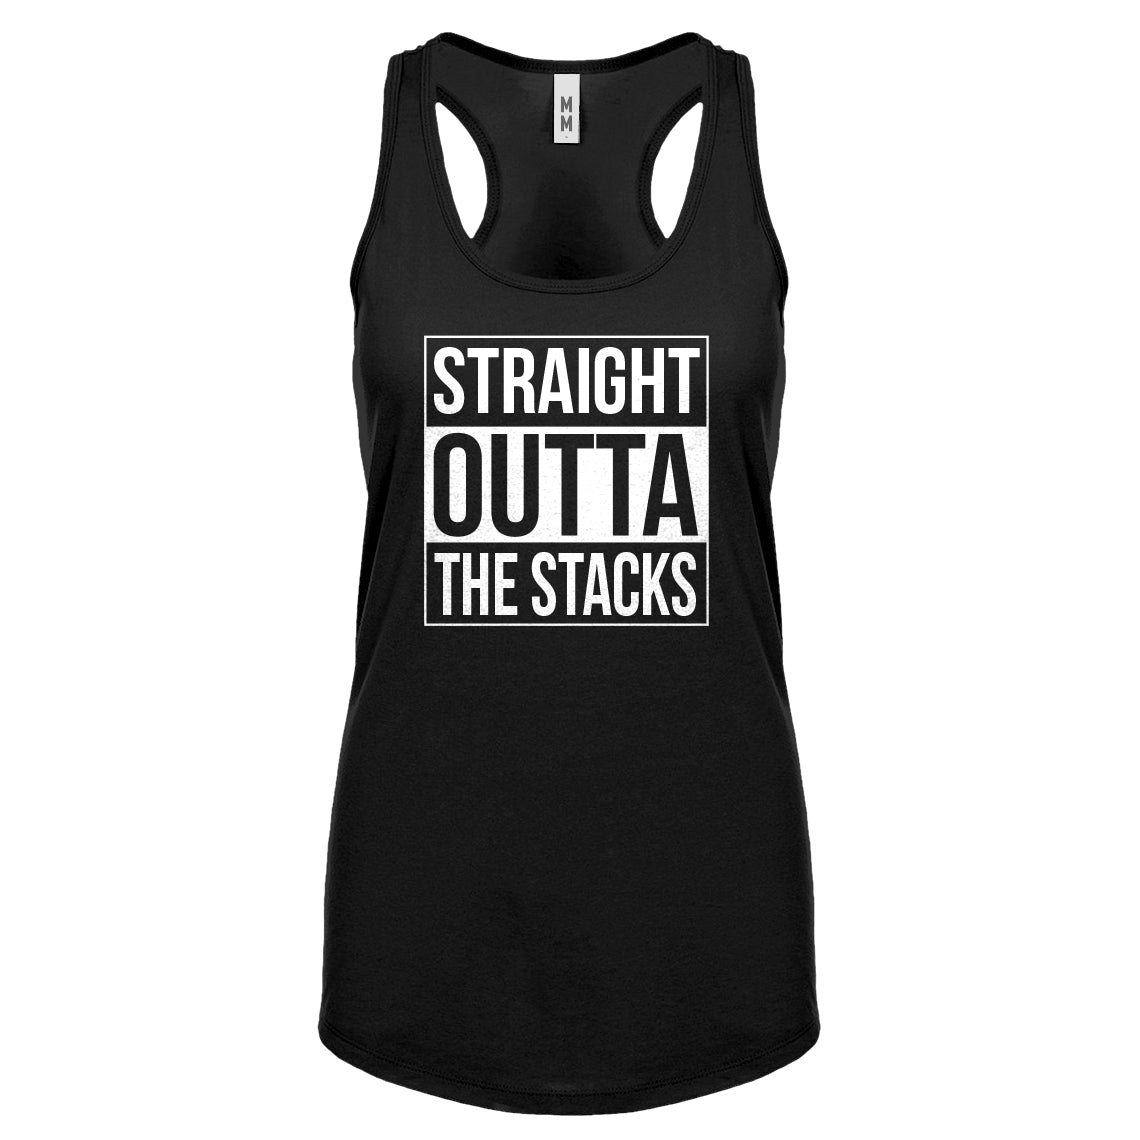 Racerback Straight Outta the Stacks Womens Tank Top